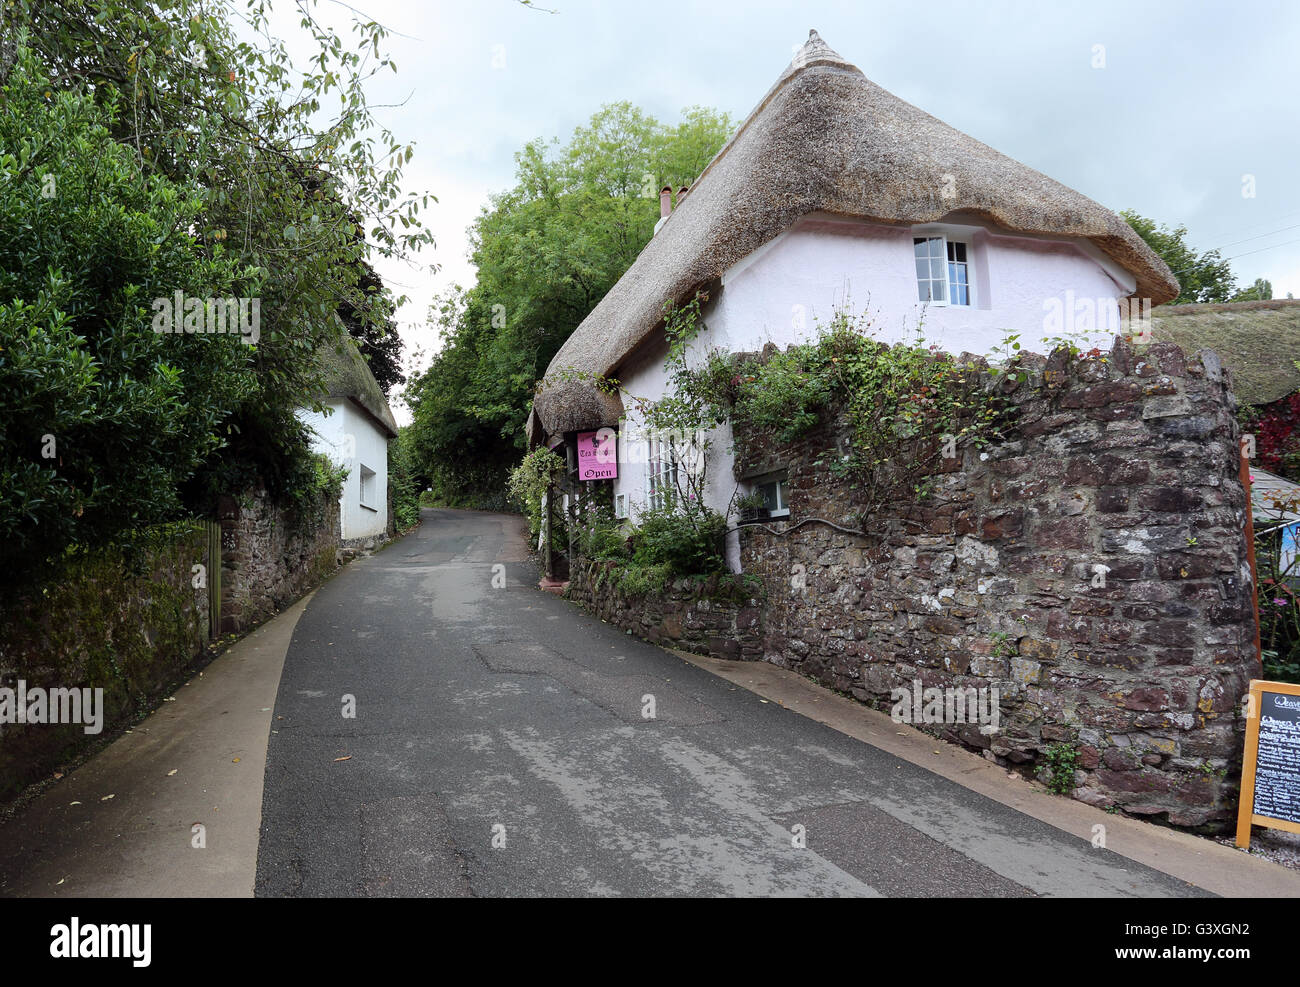 A thatched house converted into a tea room in the picturesque village of Cockington, Devon, England, UK Stock Photo